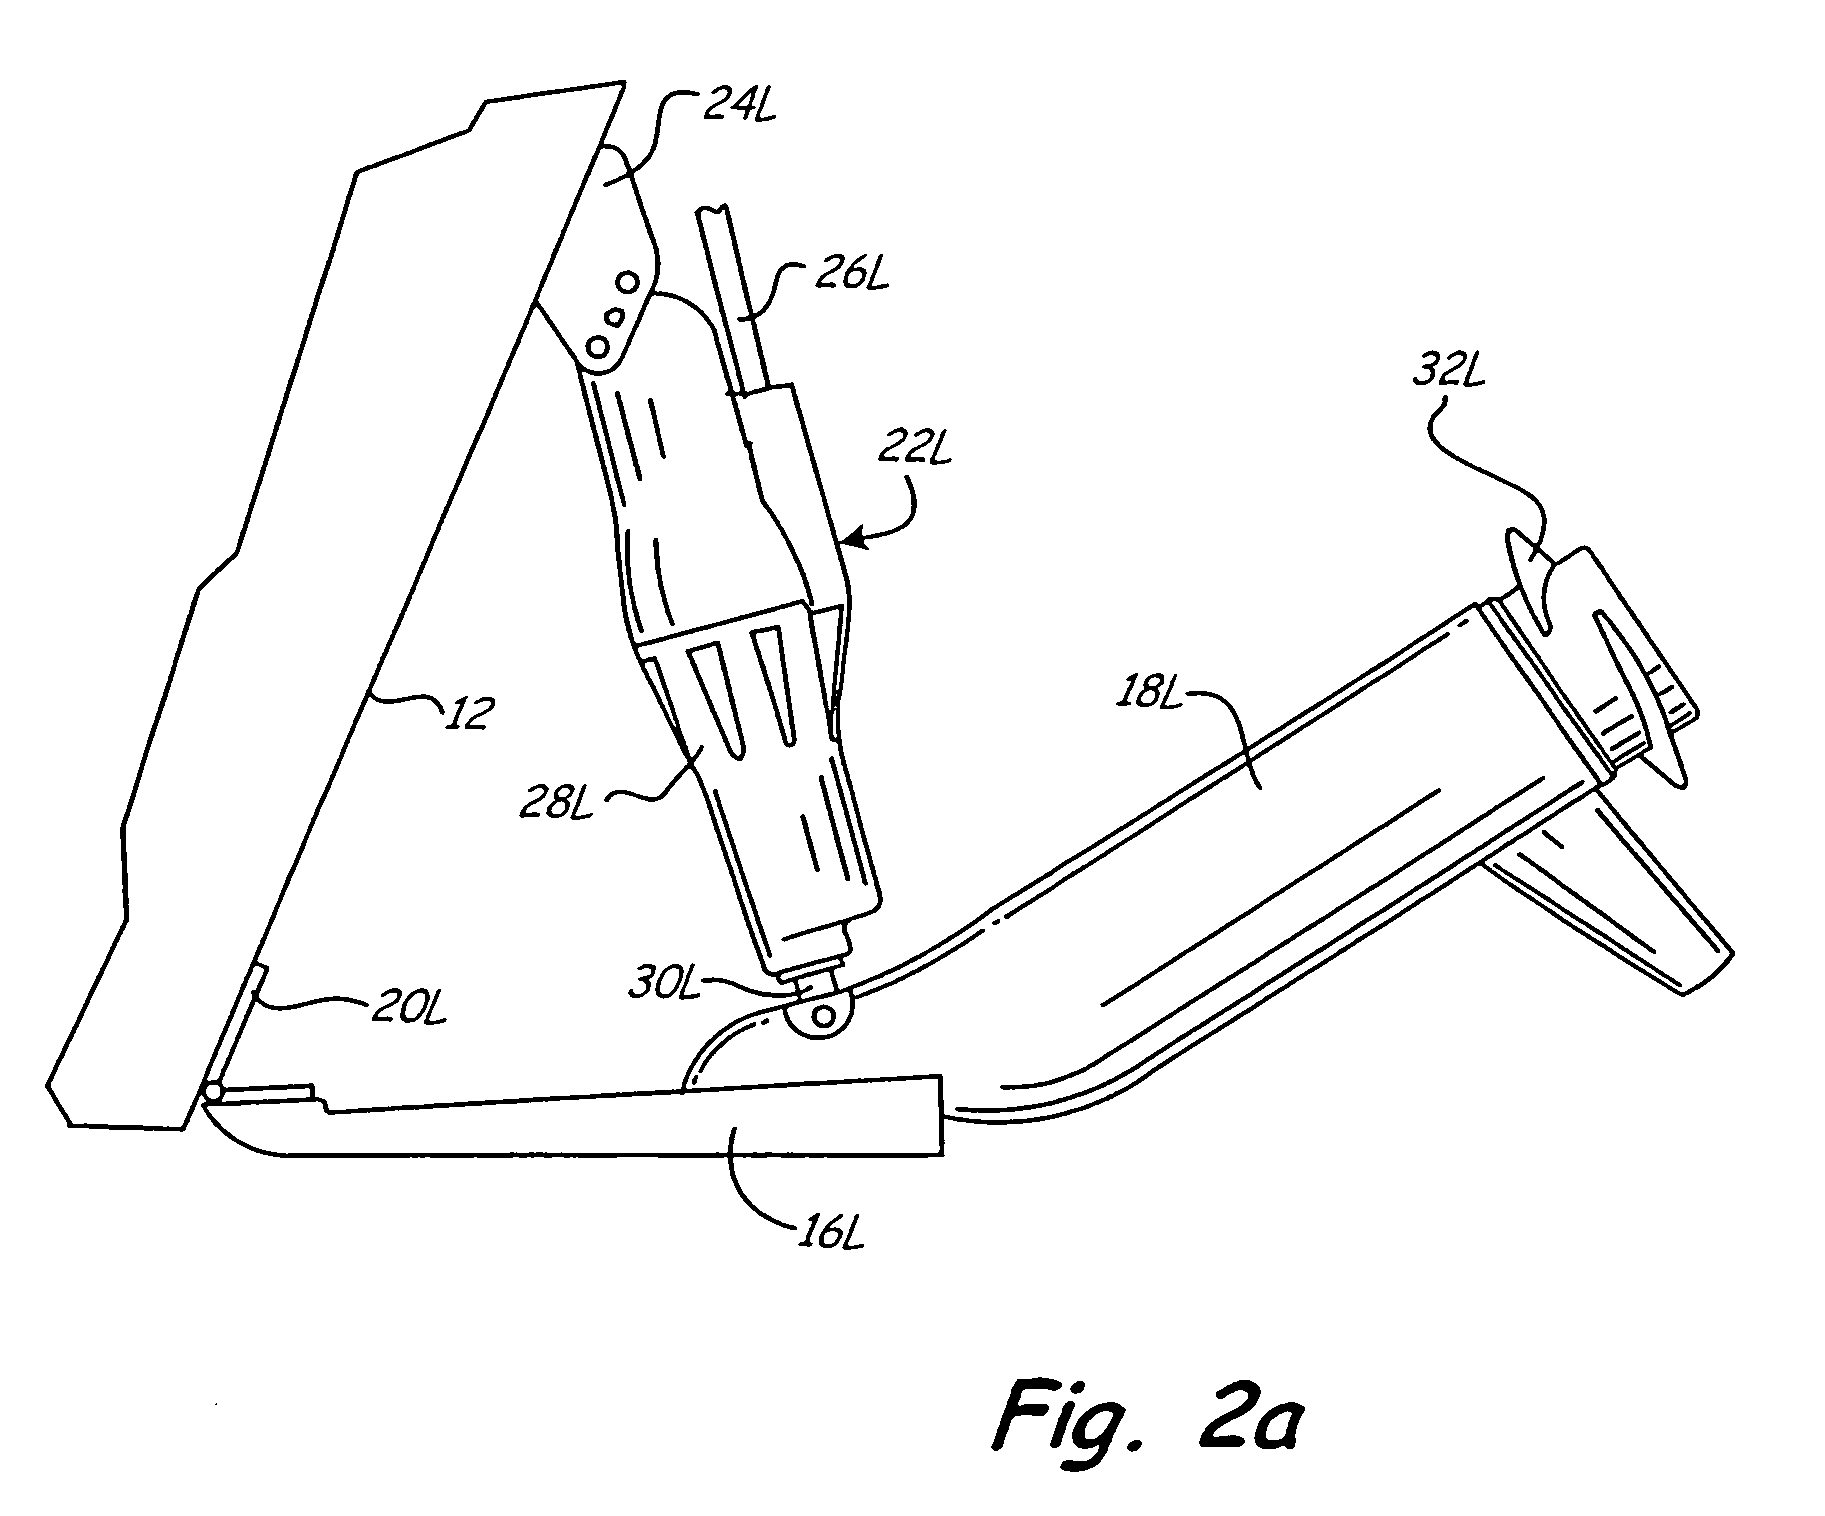 Boat control system with return to center steering command